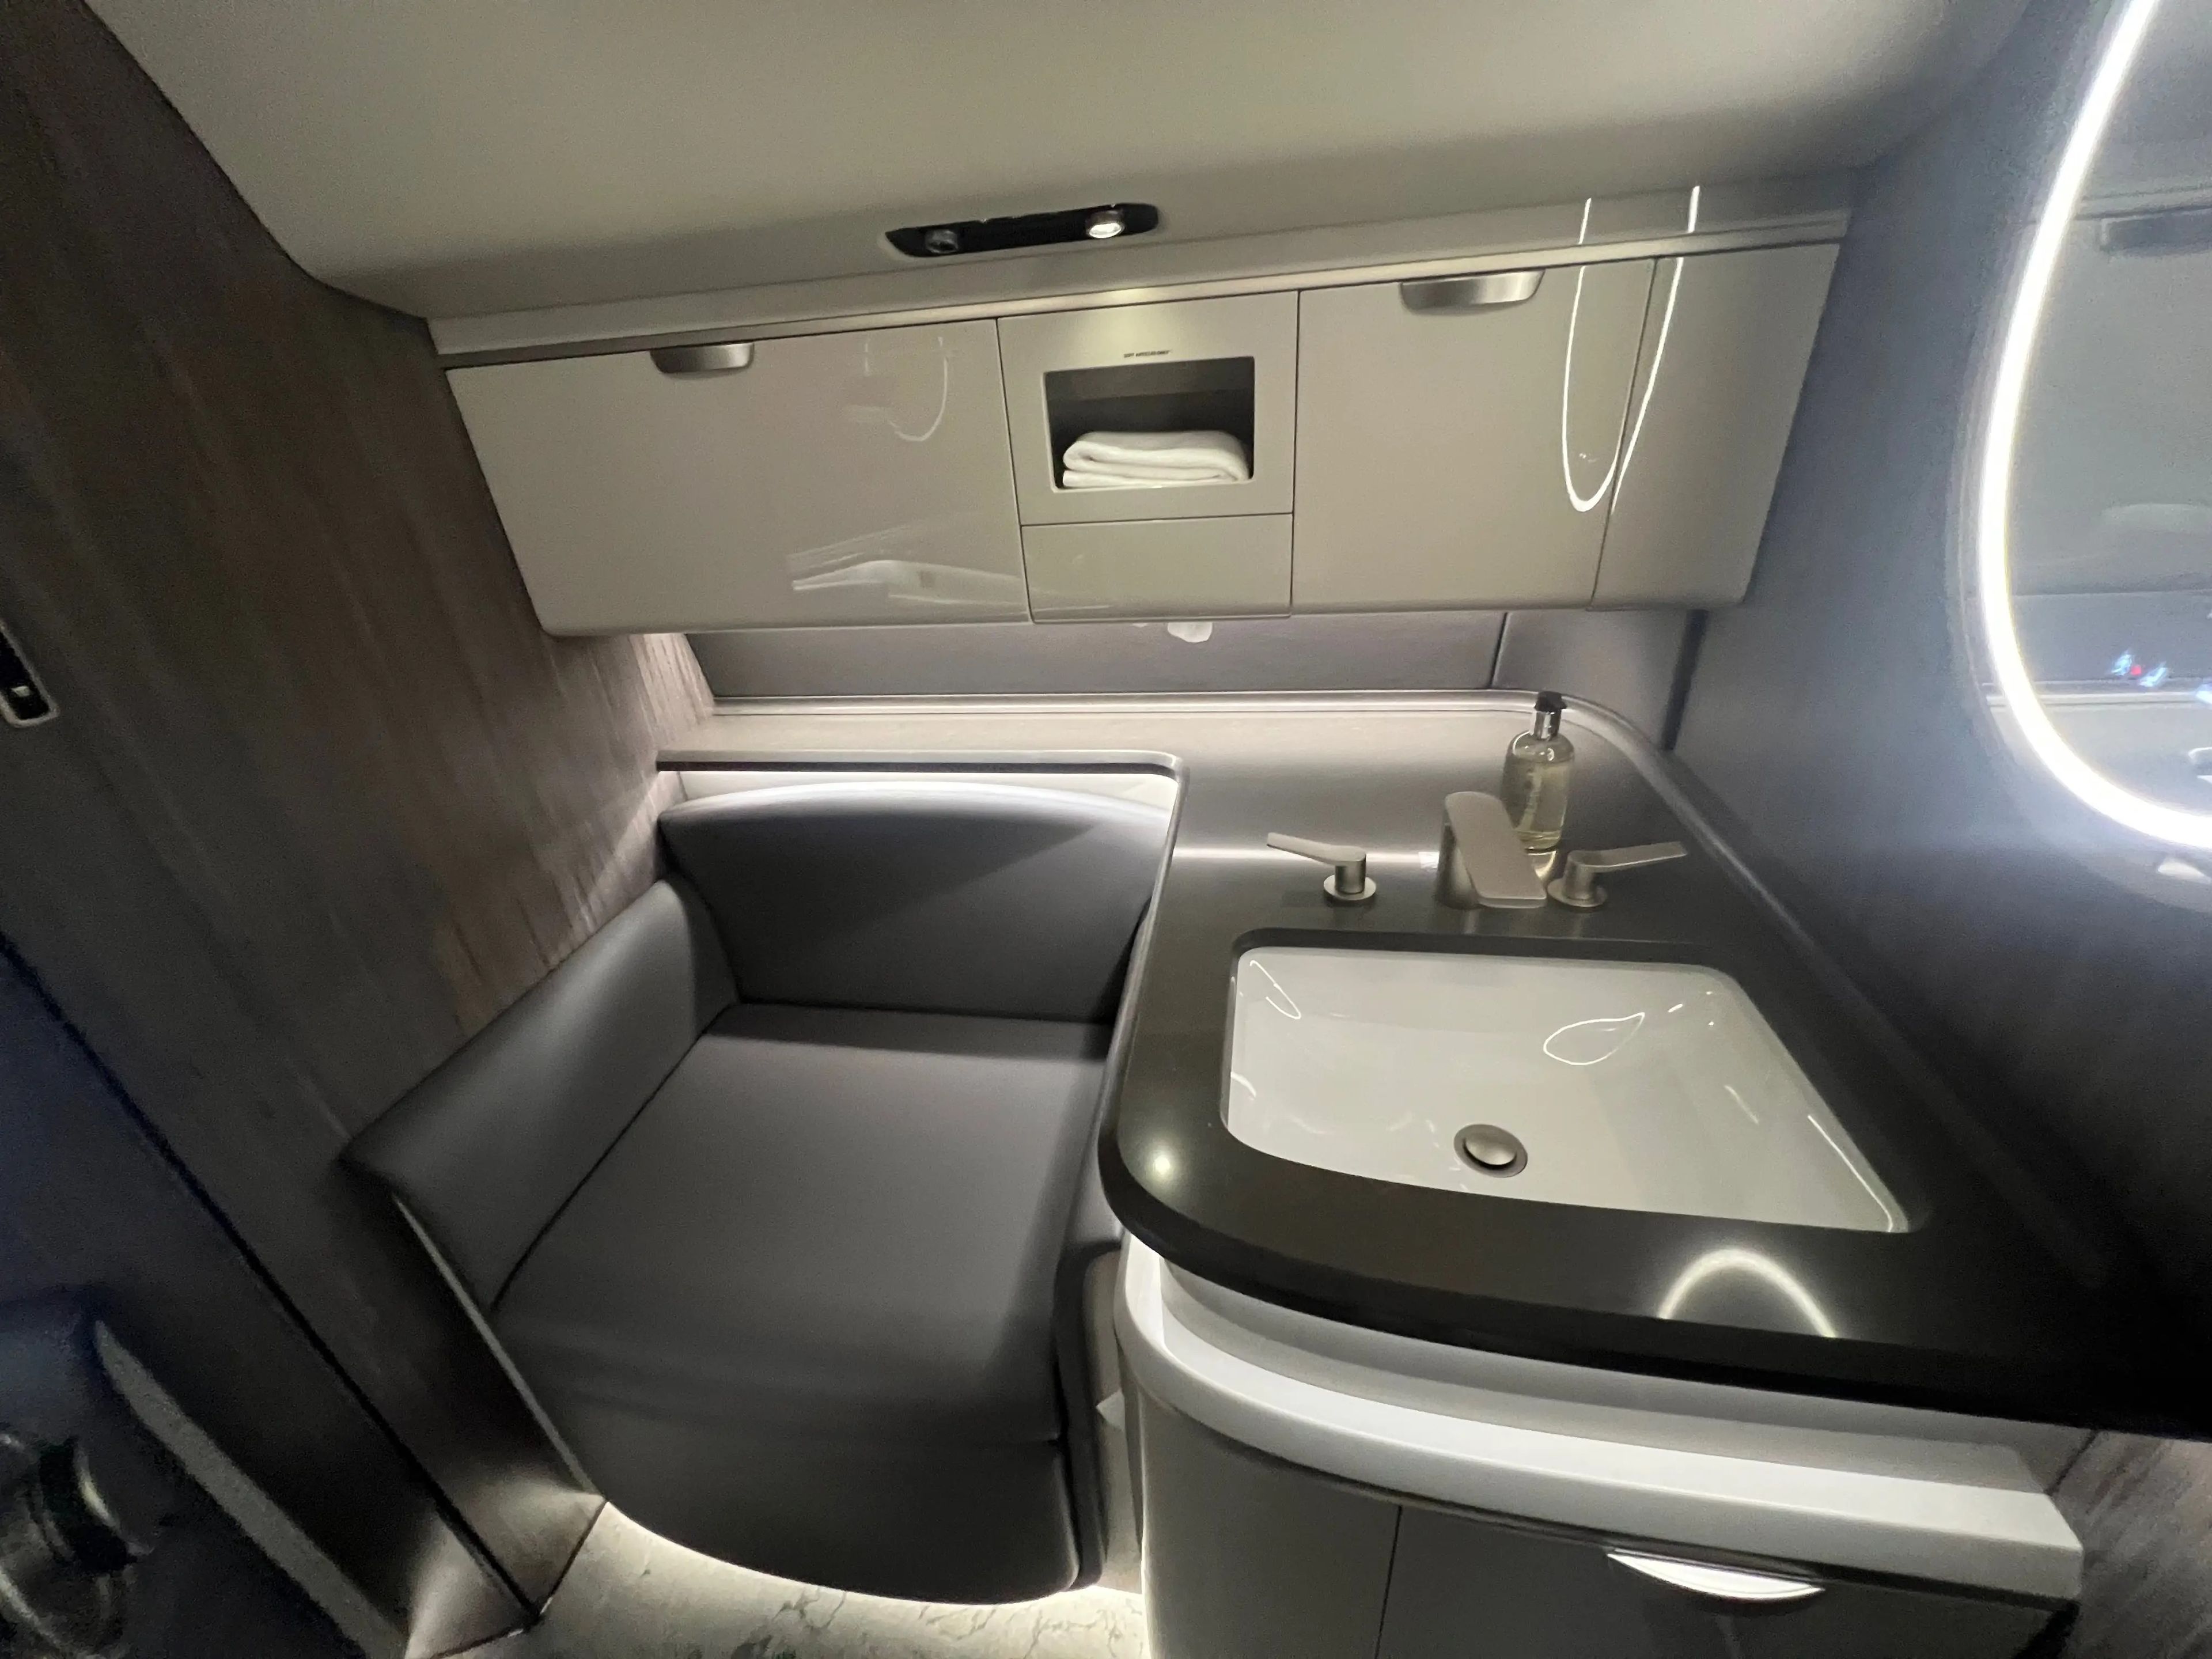 The lavatory with the toilet seat down to create a regular seat.